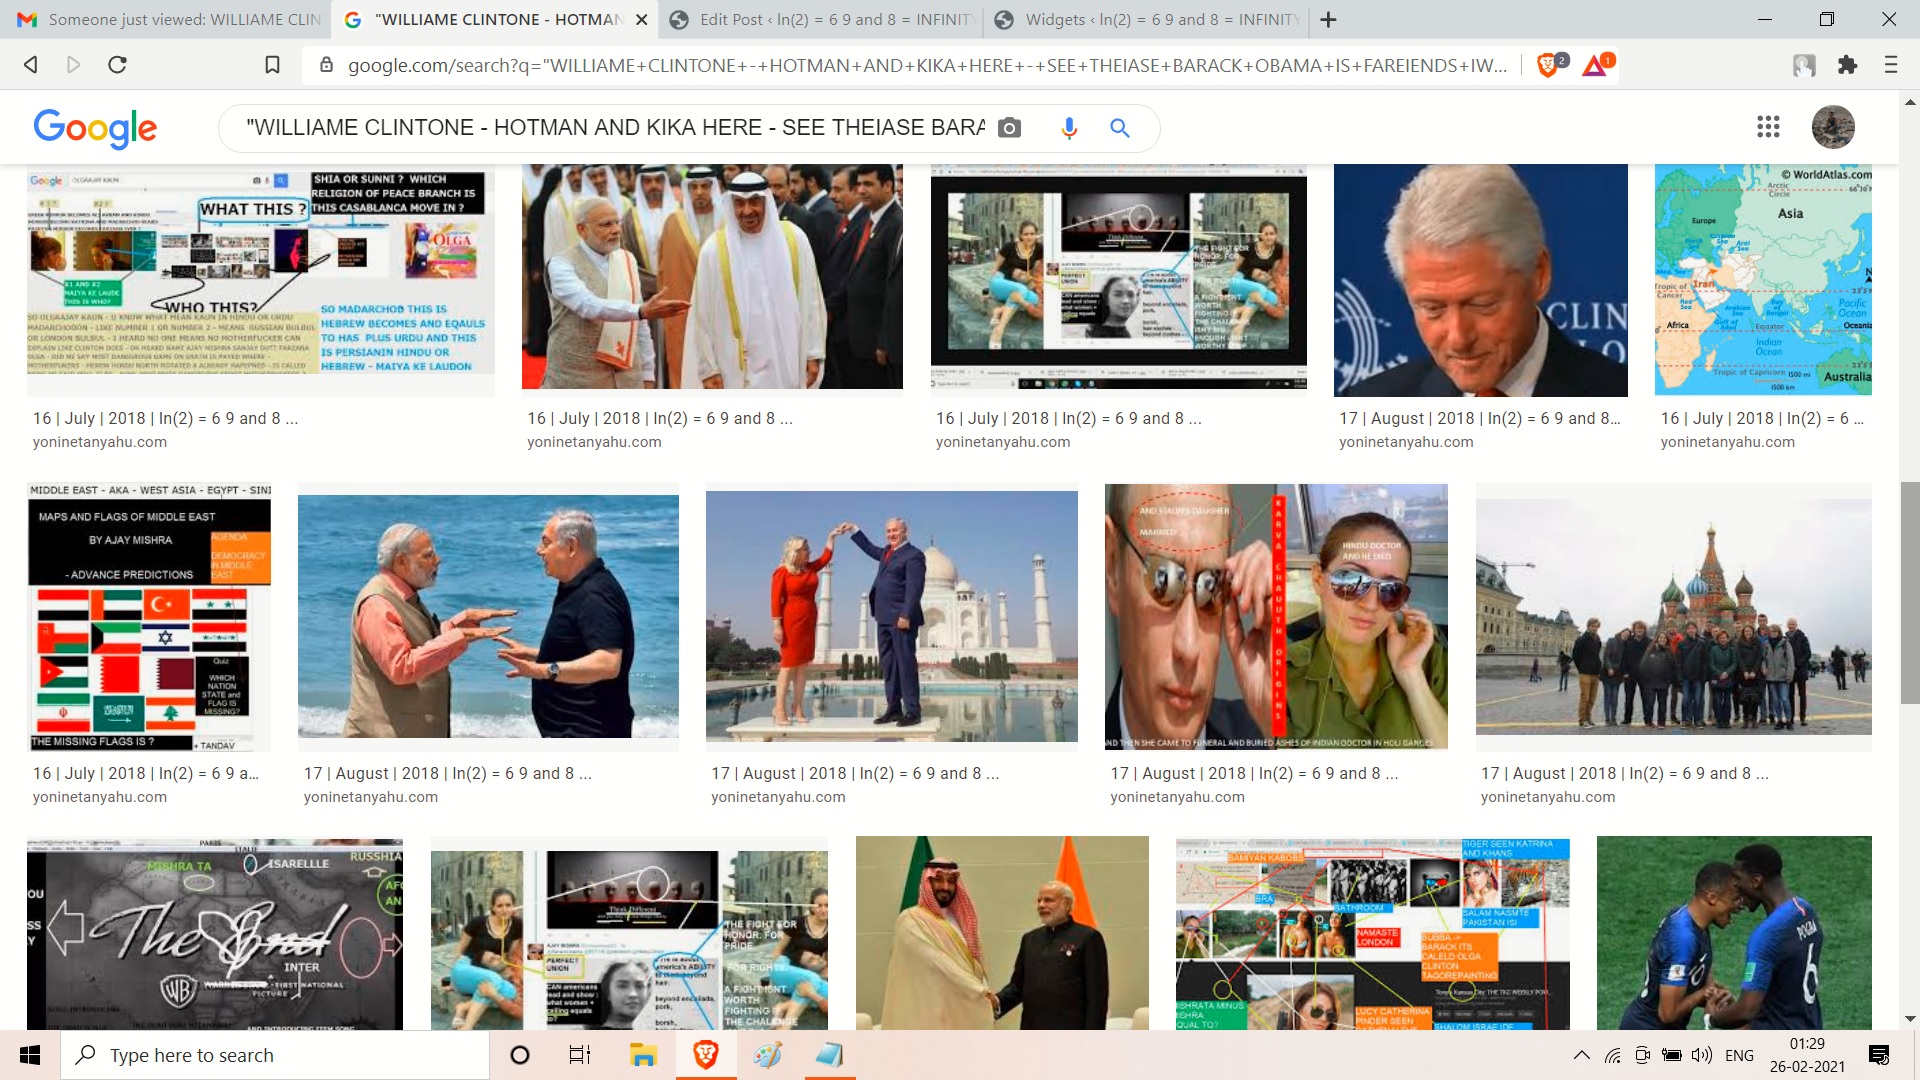 POPE FRANCIS AND BAARCK OBAMA DN MAFIA AND OLGA AND WILLIAME CLINTON AND HOTMAN AND WHO